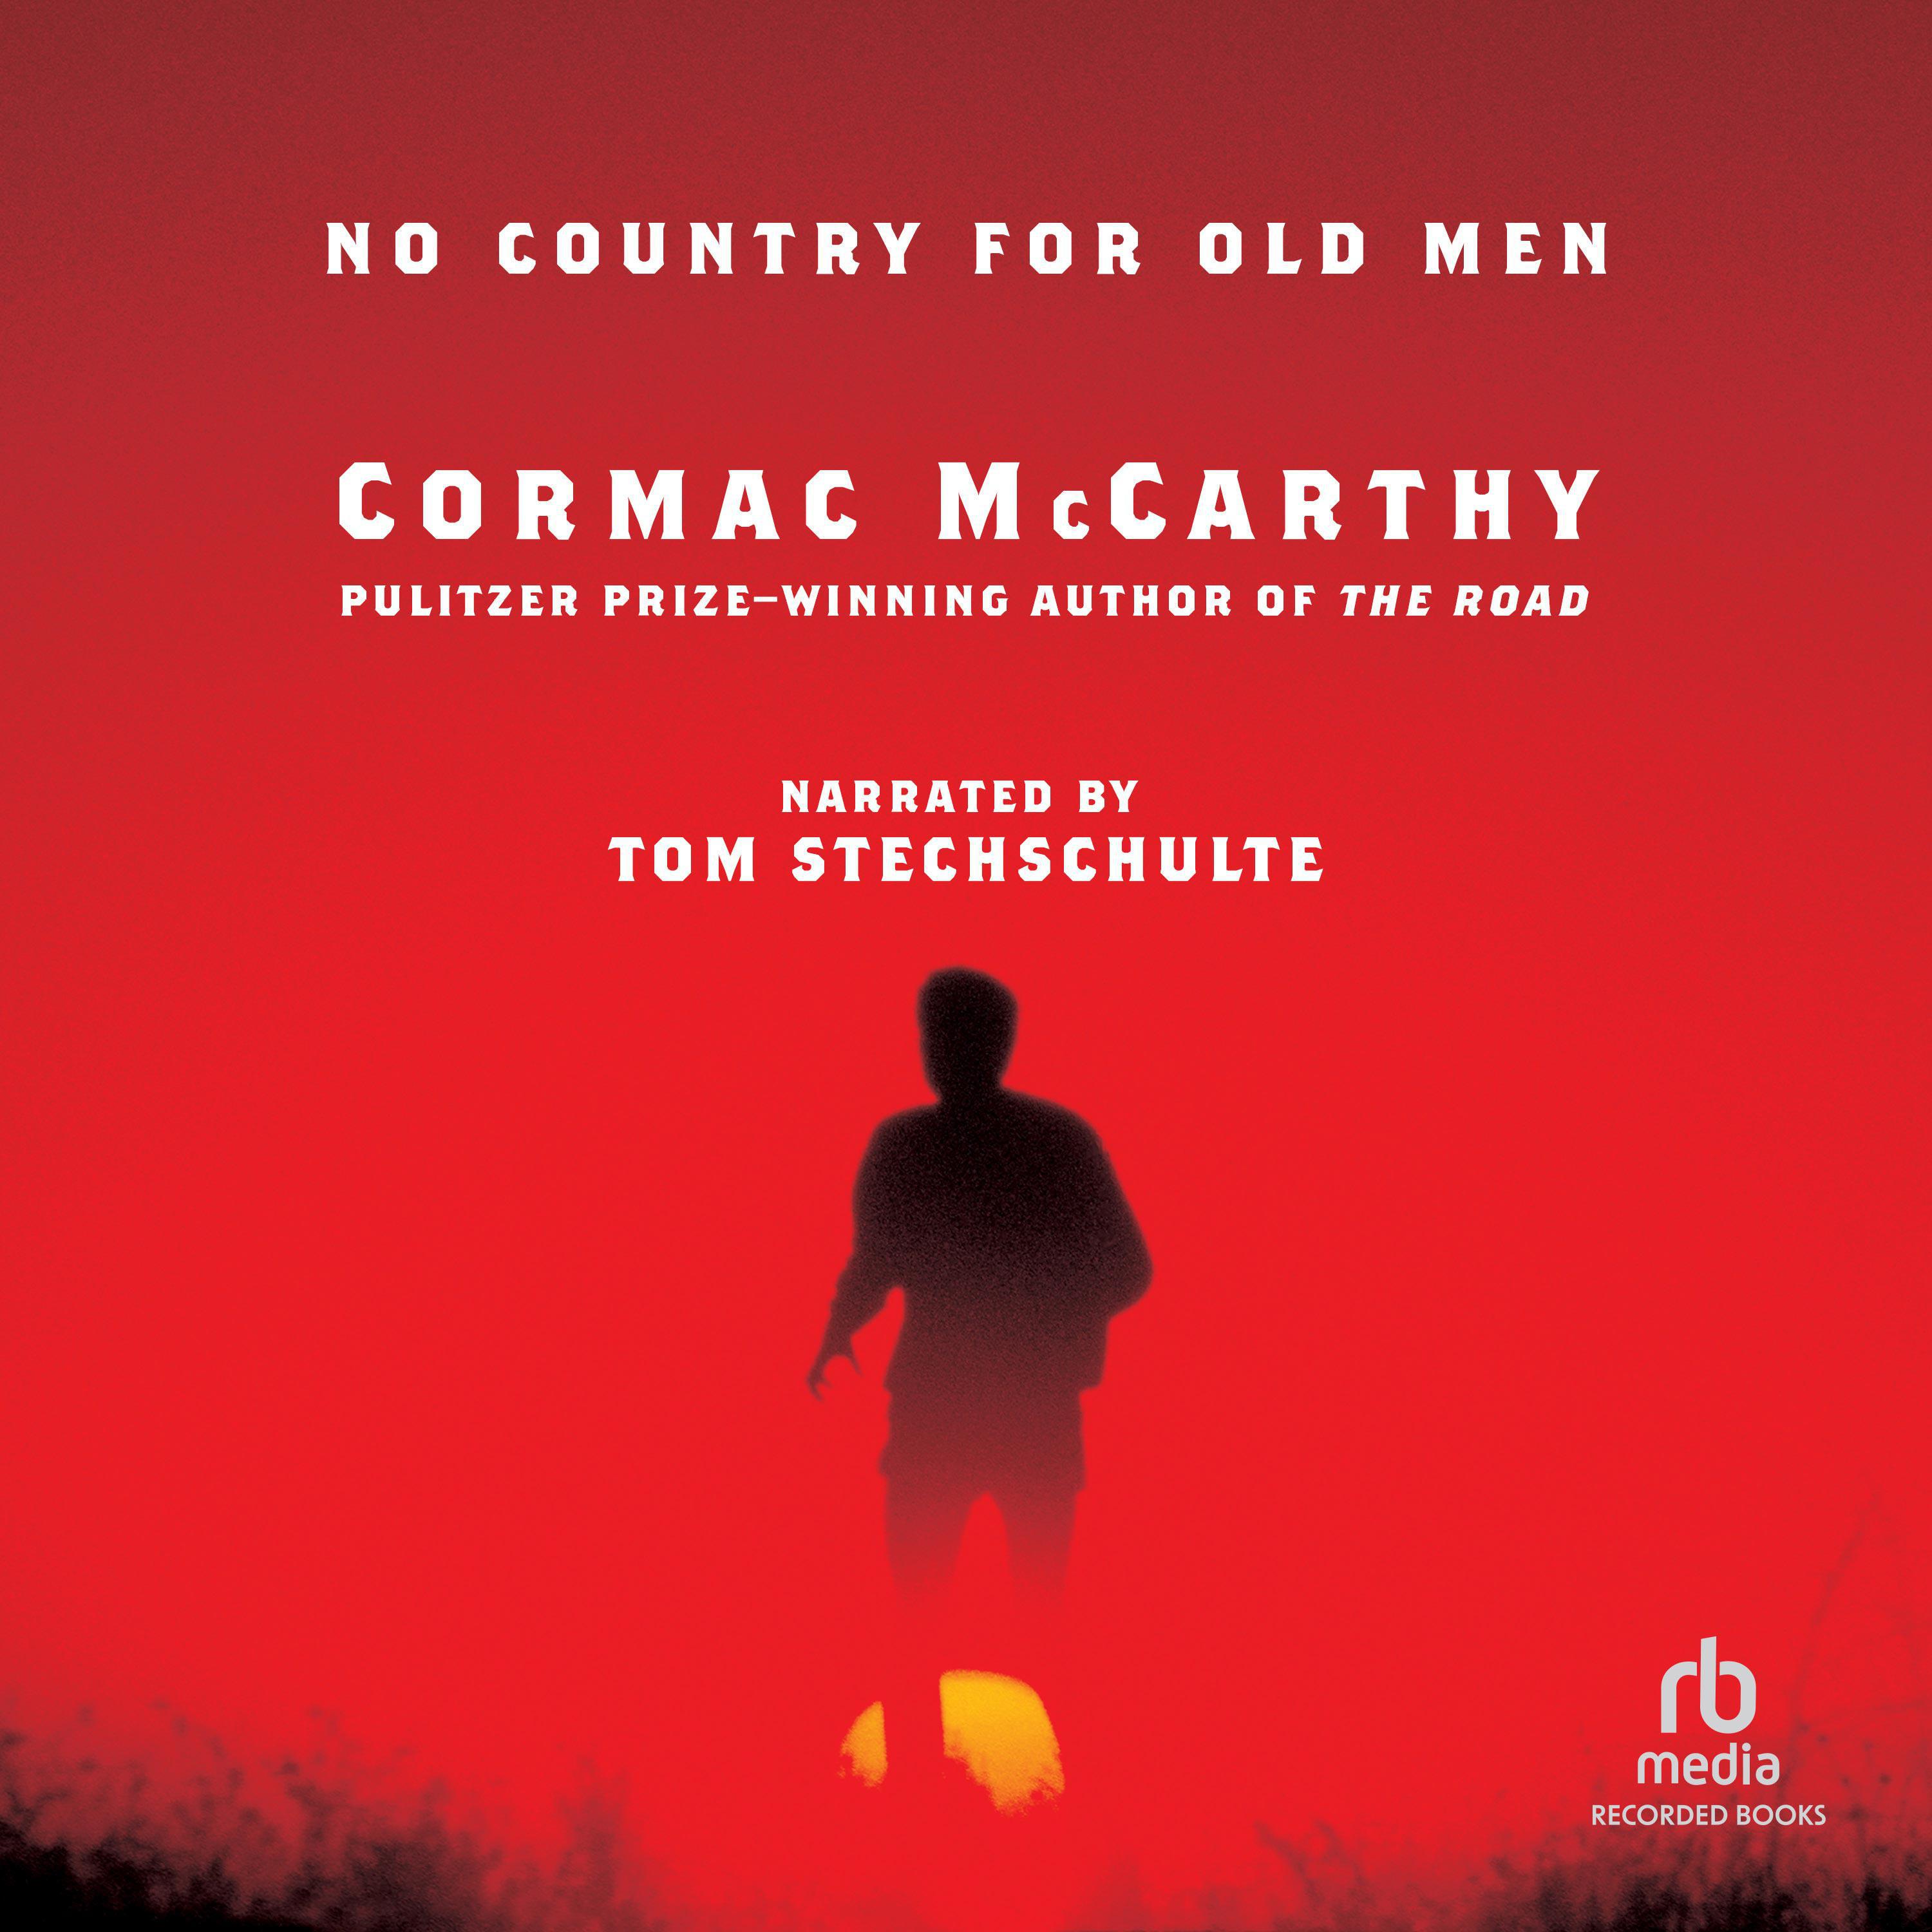 No Country for Old Men - Audiobook | Listen Instantly!